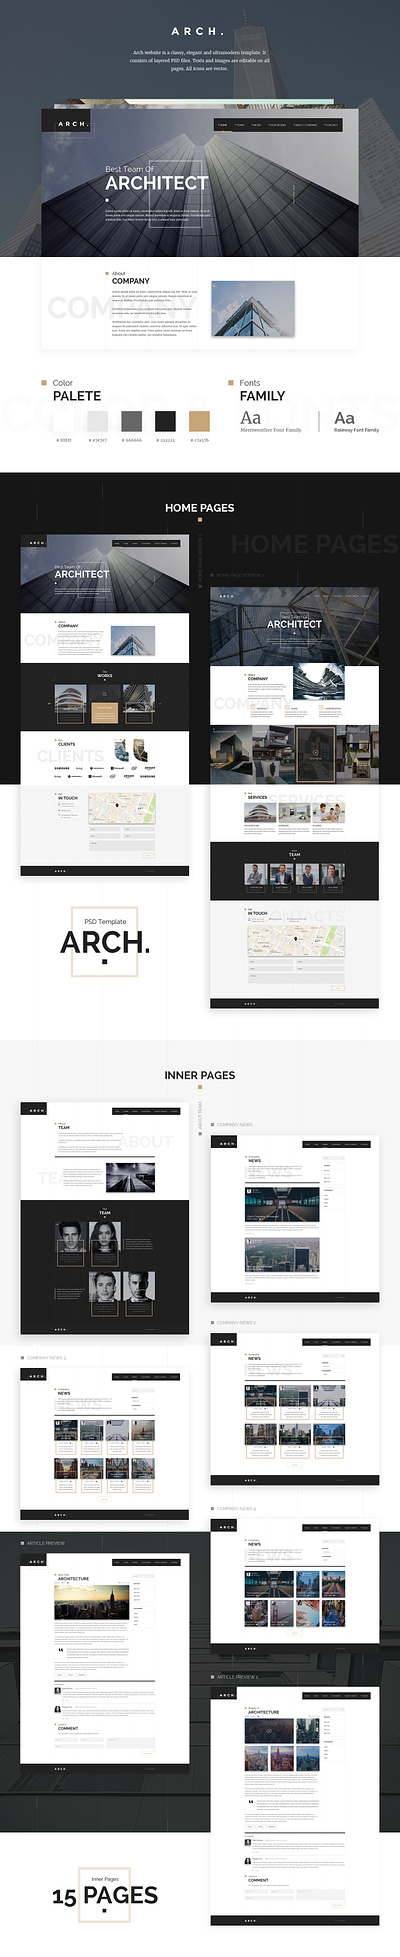 Arch - Homepage architecture design landing page ui user interface ux webdesign website